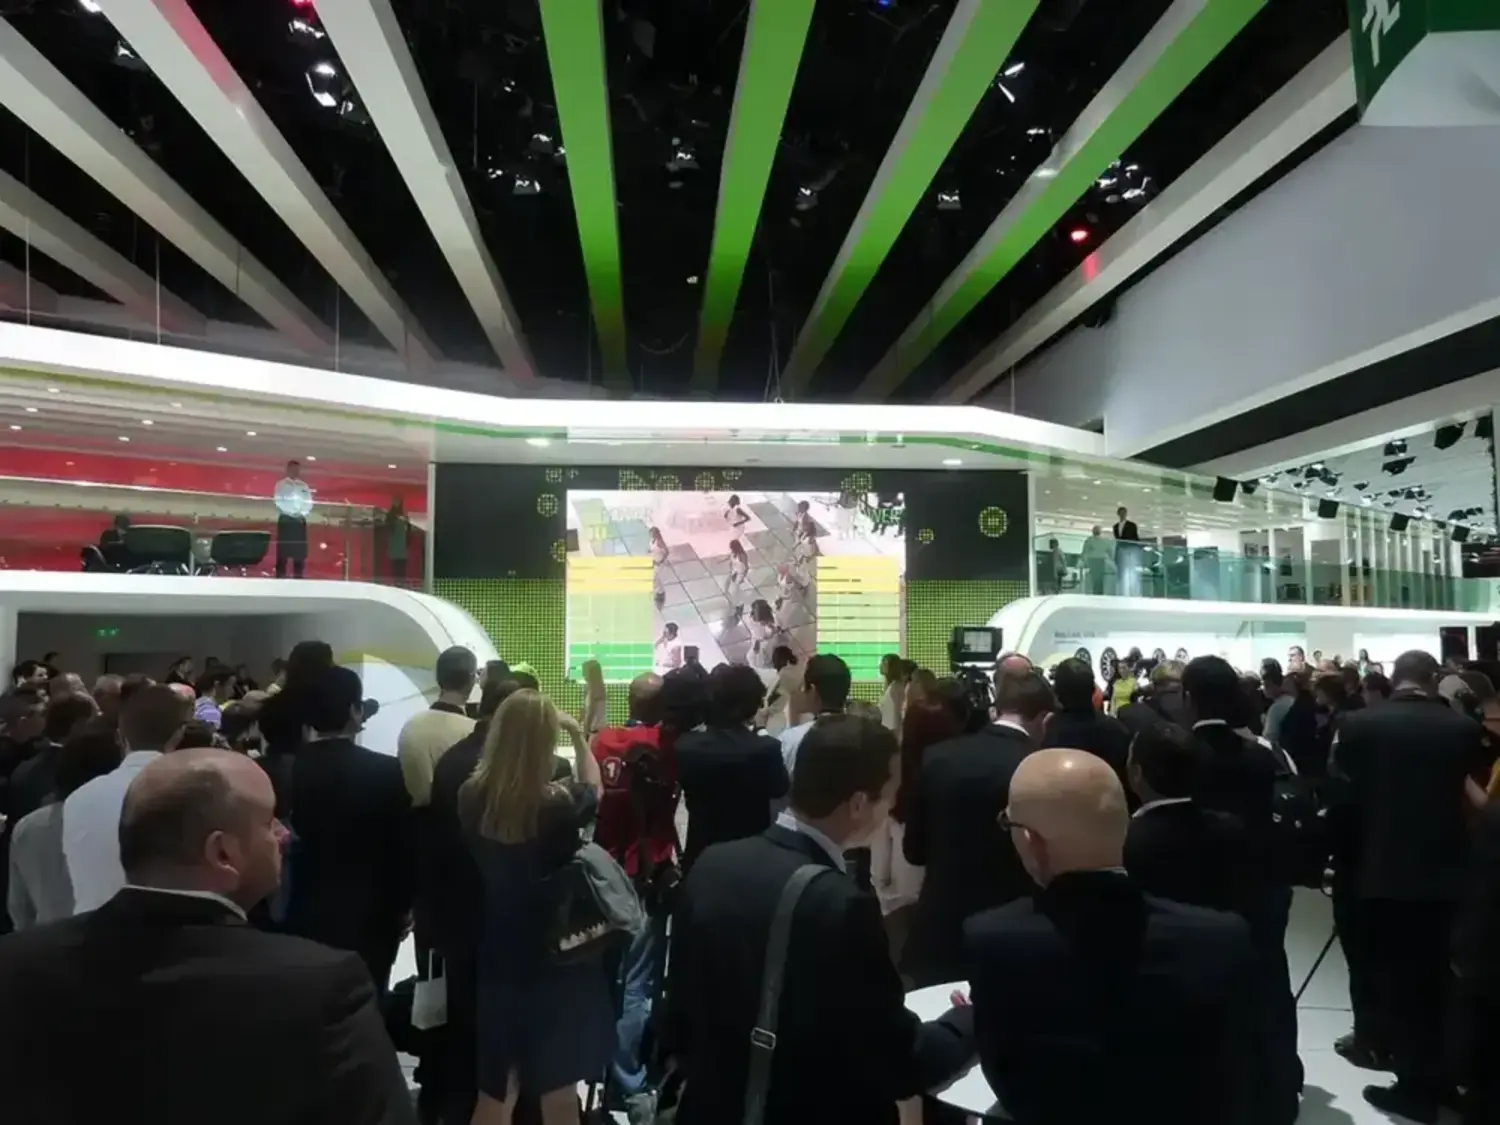 Paris Motor Show SKODA exhibition stand with kinetic energy floors